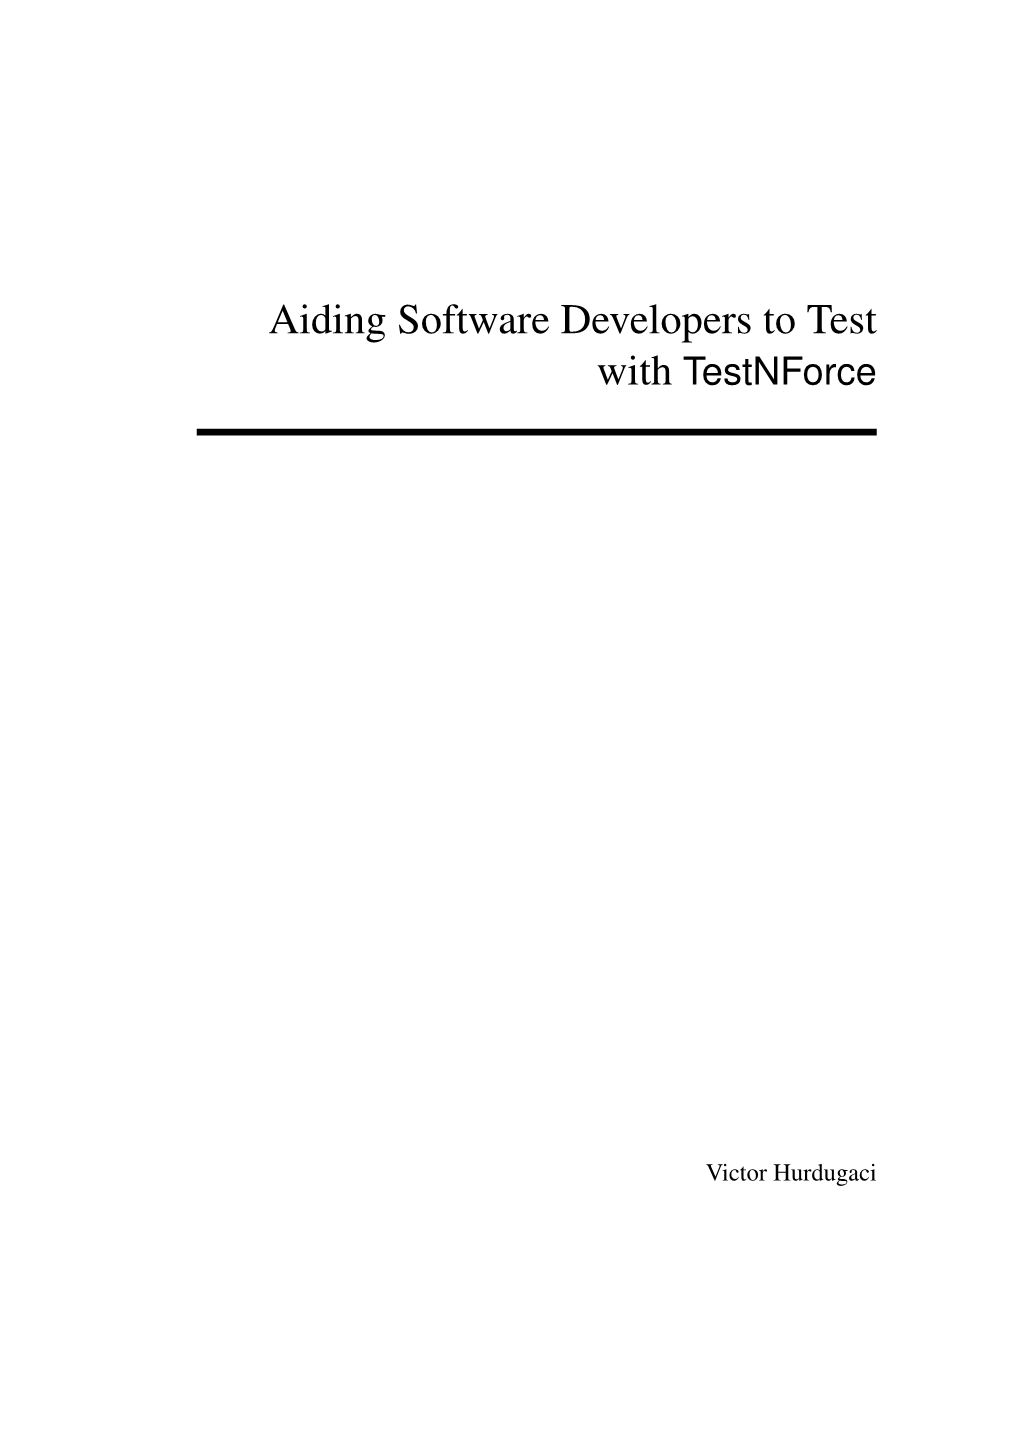 Aiding Software Developers to Test with Testnforce